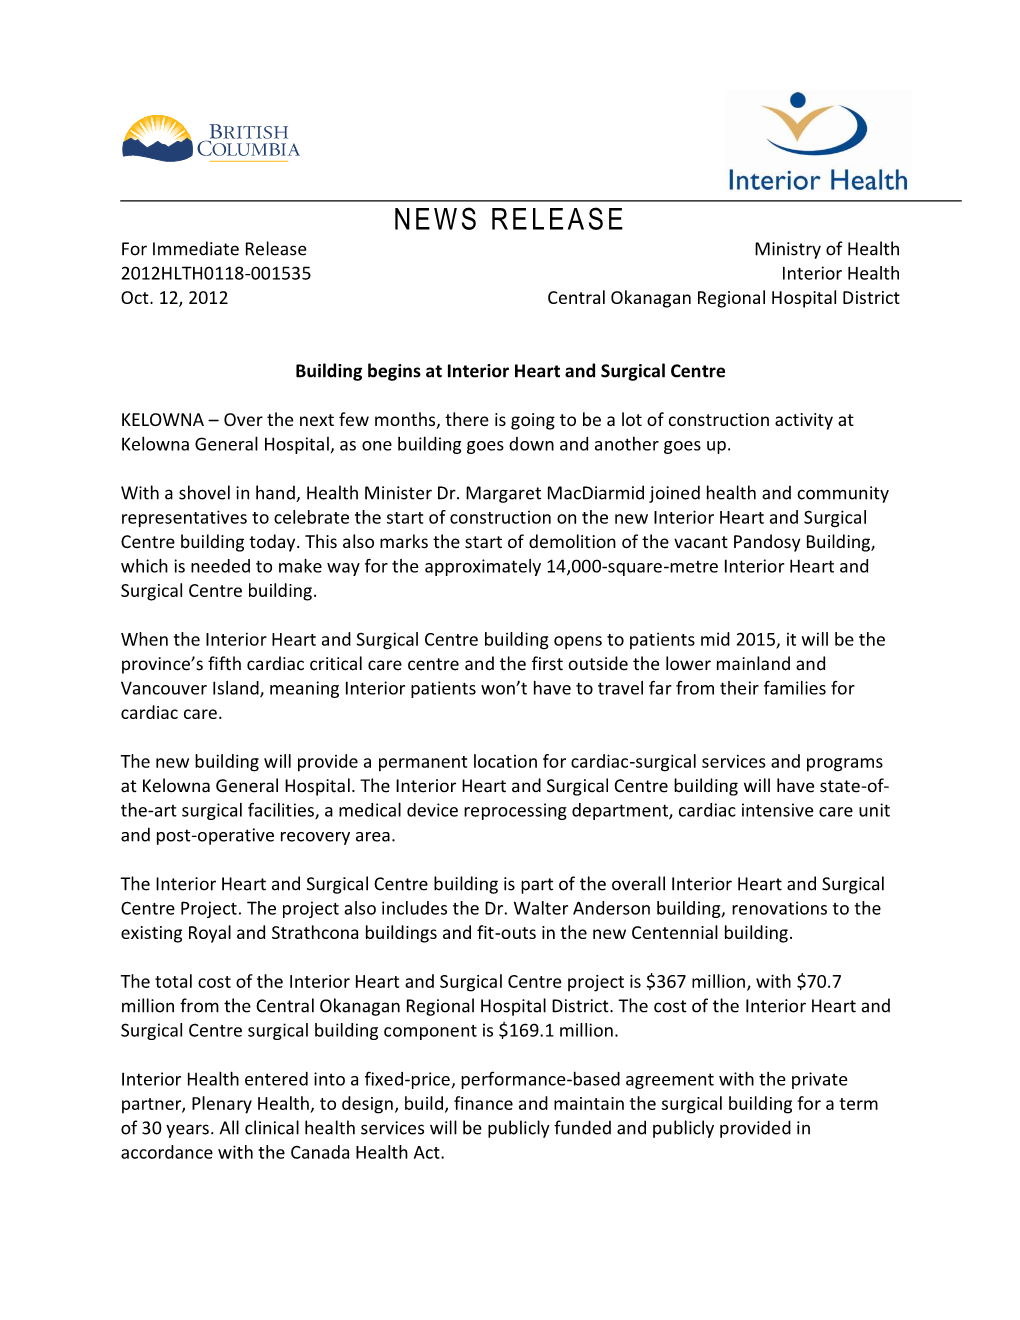 NEWS RELEASE for Immediate Release Ministry of Health 2012HLTH0118-001535 Interior Health Oct